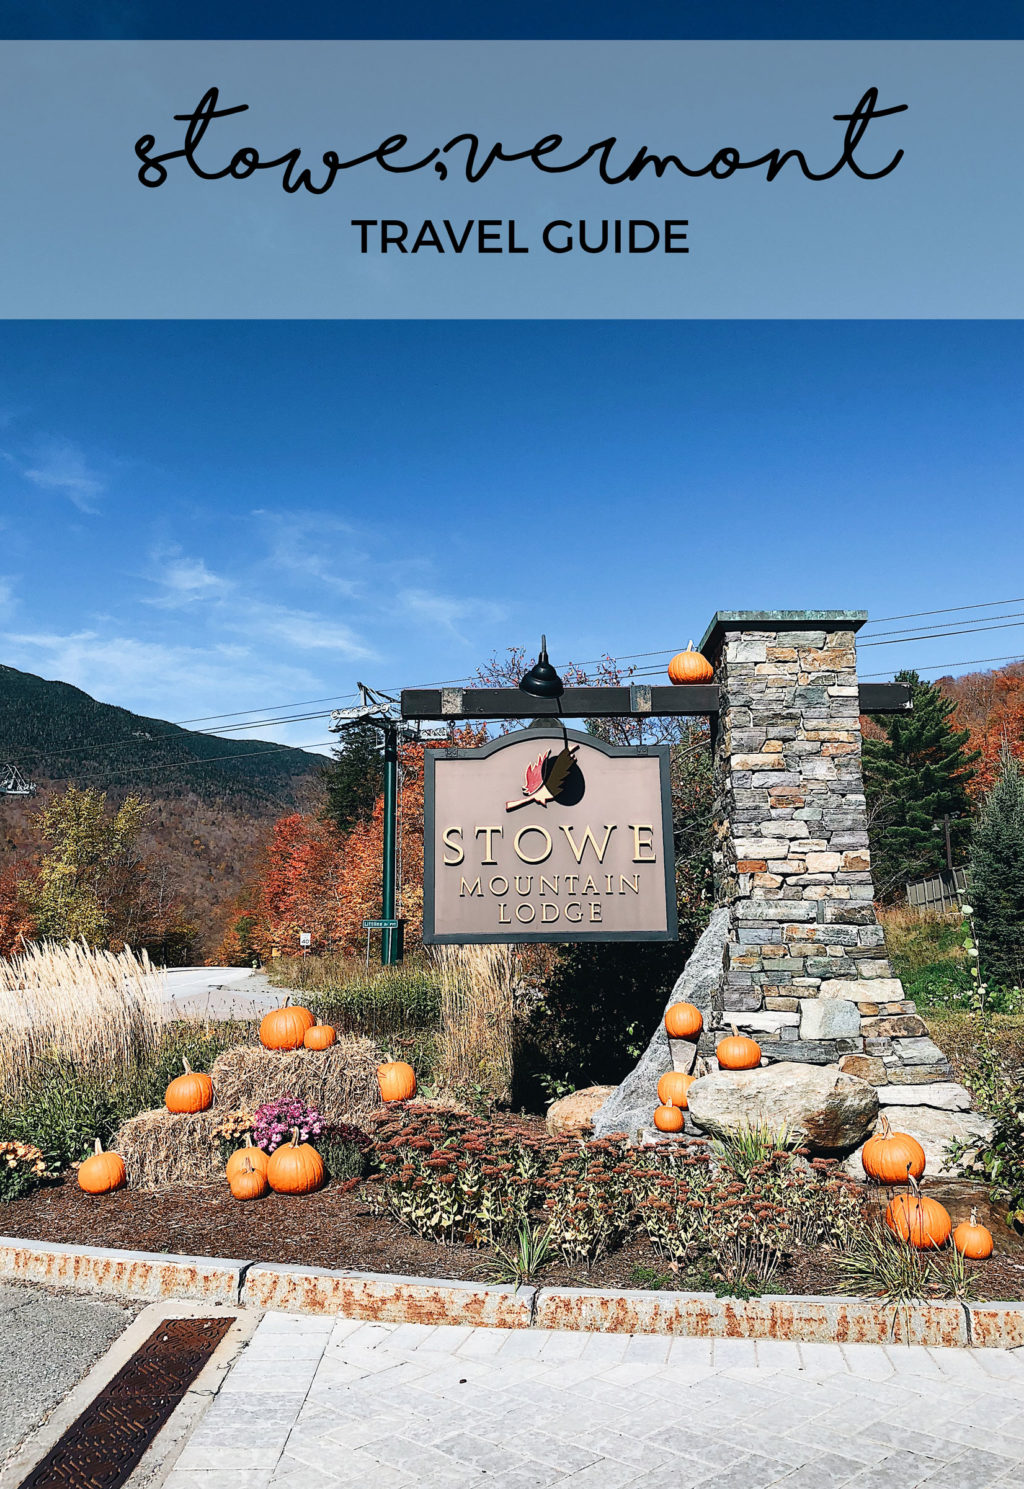 Stowe Vermont Travel Guide